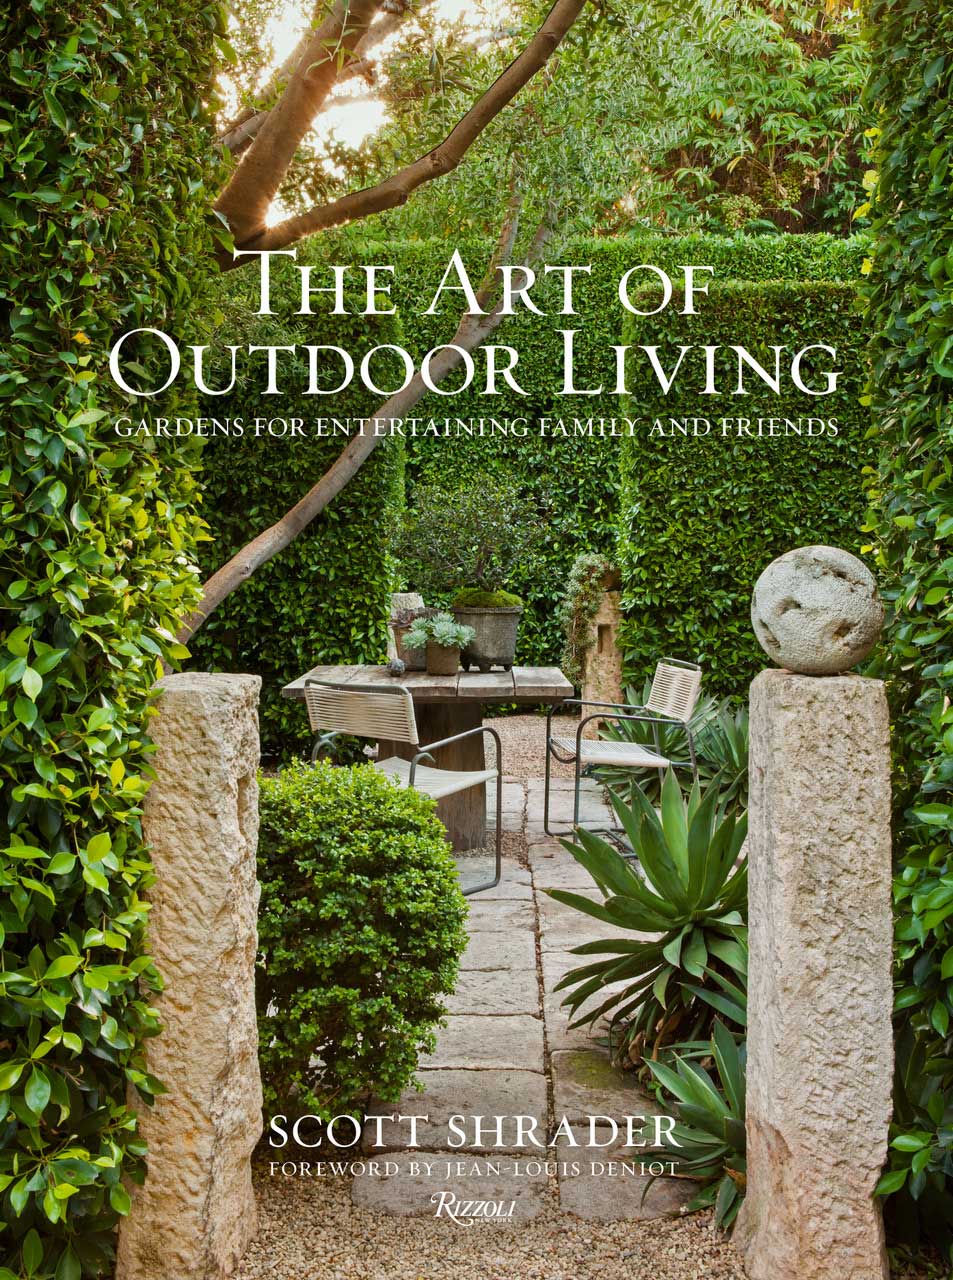 The Art of Outdoor Living book cover